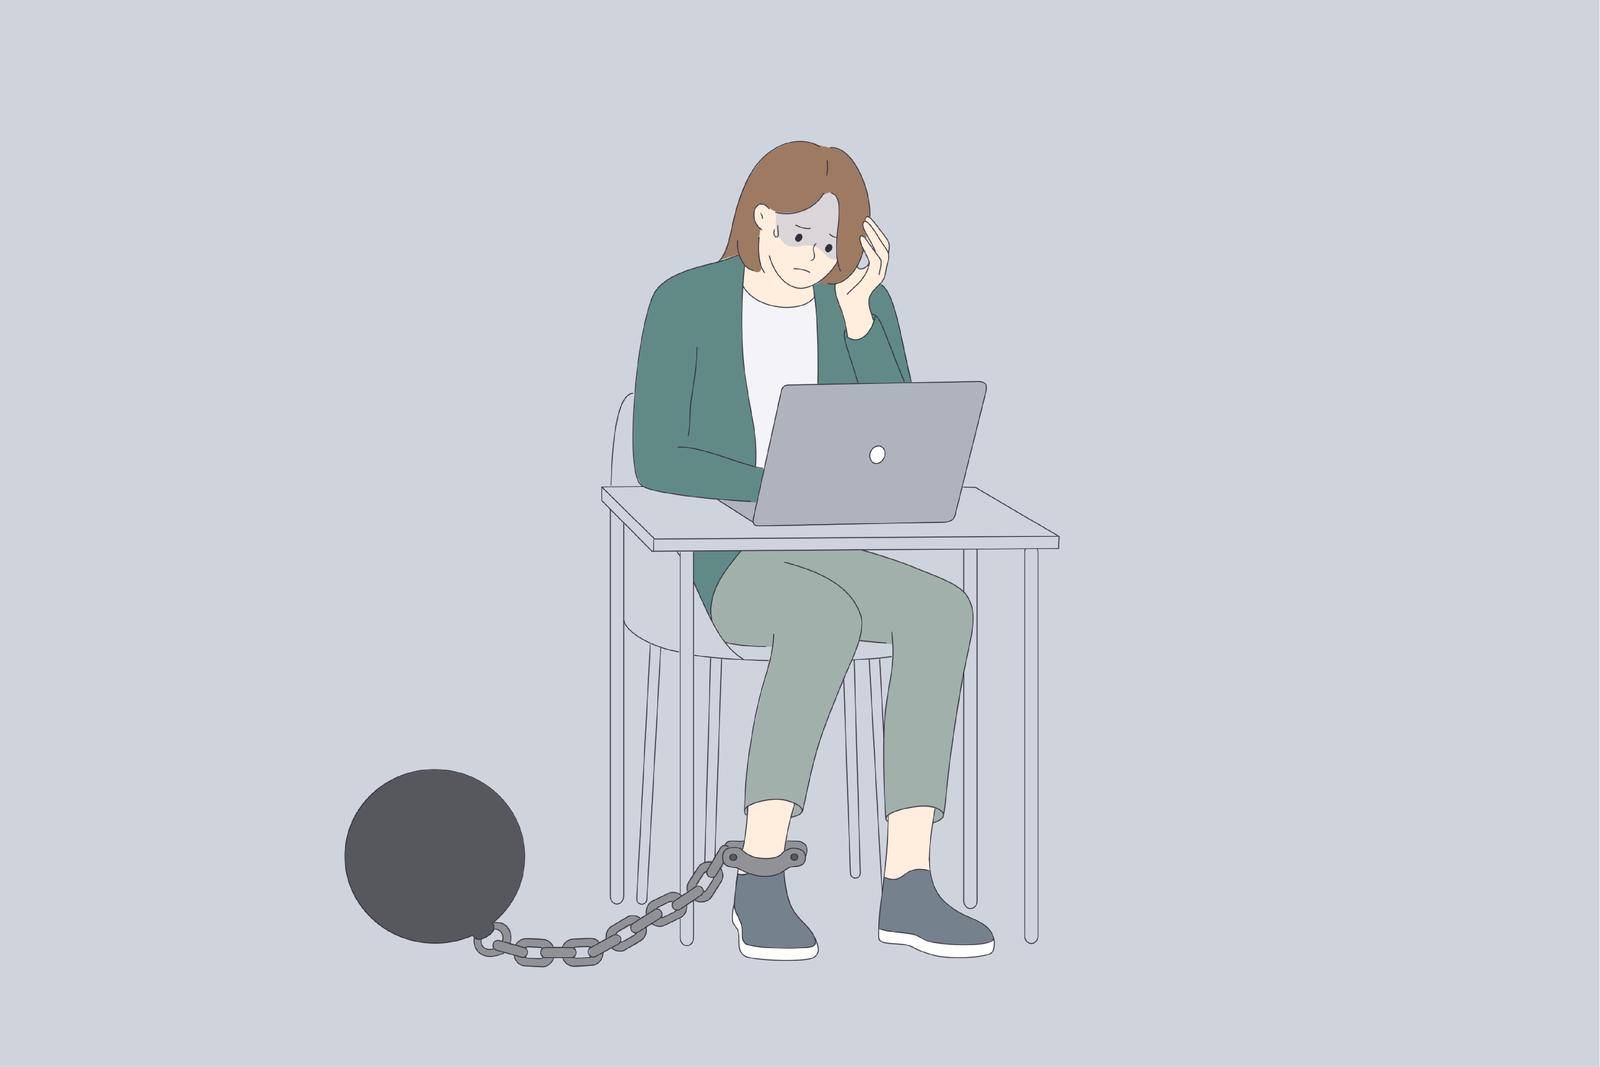 Debts and bankrupt concept. Young depressed woman cartoon character sitting with laptop and kettlebell on leg on chain feeling unhappy frustrated vector illustration